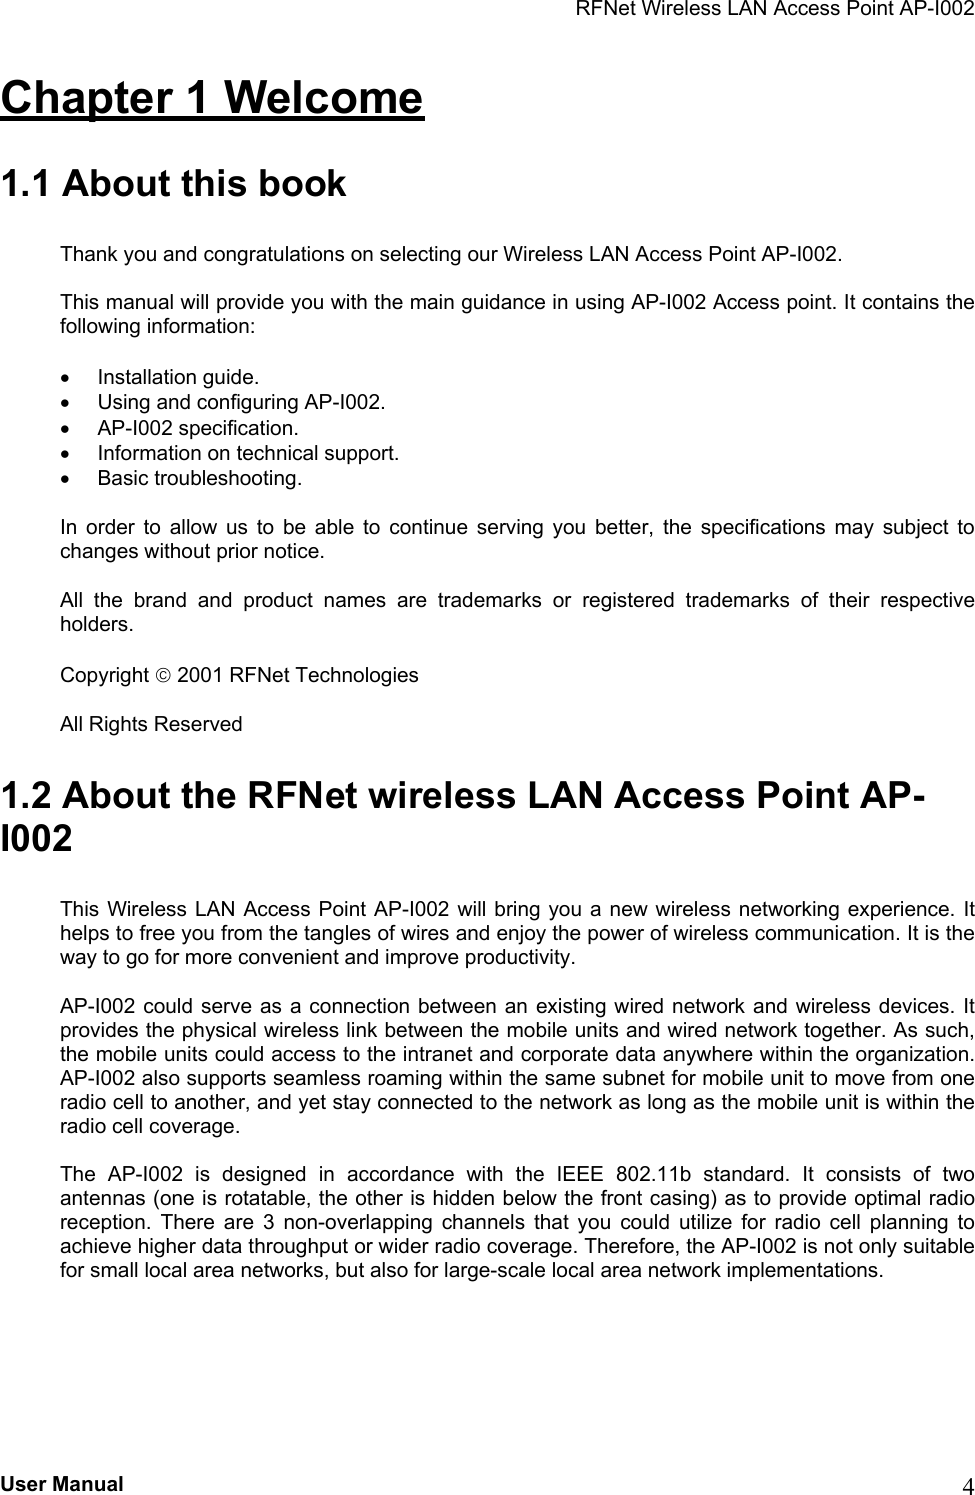 RFNet Wireless LAN Access Point AP-I002 Chapter 1 Welcome 1.1 About this book Thank you and congratulations on selecting our Wireless LAN Access Point AP-I002. This manual will provide you with the main guidance in using AP-I002 Access point. It contains the following information: •  Installation guide. •  Using and configuring AP-I002. •  AP-I002 specification. •  Information on technical support. •  Basic troubleshooting. In order to allow us to be able to continue serving you better, the specifications may subject to changes without prior notice. All the brand and product names are trademarks or registered trademarks of their respective holders. Copyright  2001 RFNet Technologies All Rights Reserved 1.2 About the RFNet wireless LAN Access Point AP-I002 This Wireless LAN Access Point AP-I002 will bring you a new wireless networking experience. It helps to free you from the tangles of wires and enjoy the power of wireless communication. It is the way to go for more convenient and improve productivity. AP-I002 could serve as a connection between an existing wired network and wireless devices. It provides the physical wireless link between the mobile units and wired network together. As such, the mobile units could access to the intranet and corporate data anywhere within the organization. AP-I002 also supports seamless roaming within the same subnet for mobile unit to move from one radio cell to another, and yet stay connected to the network as long as the mobile unit is within the radio cell coverage. The AP-I002 is designed in accordance with the IEEE 802.11b standard. It consists of two antennas (one is rotatable, the other is hidden below the front casing) as to provide optimal radio reception. There are 3 non-overlapping channels that you could utilize for radio cell planning to achieve higher data throughput or wider radio coverage. Therefore, the AP-I002 is not only suitable for small local area networks, but also for large-scale local area network implementations. User Manual  4 